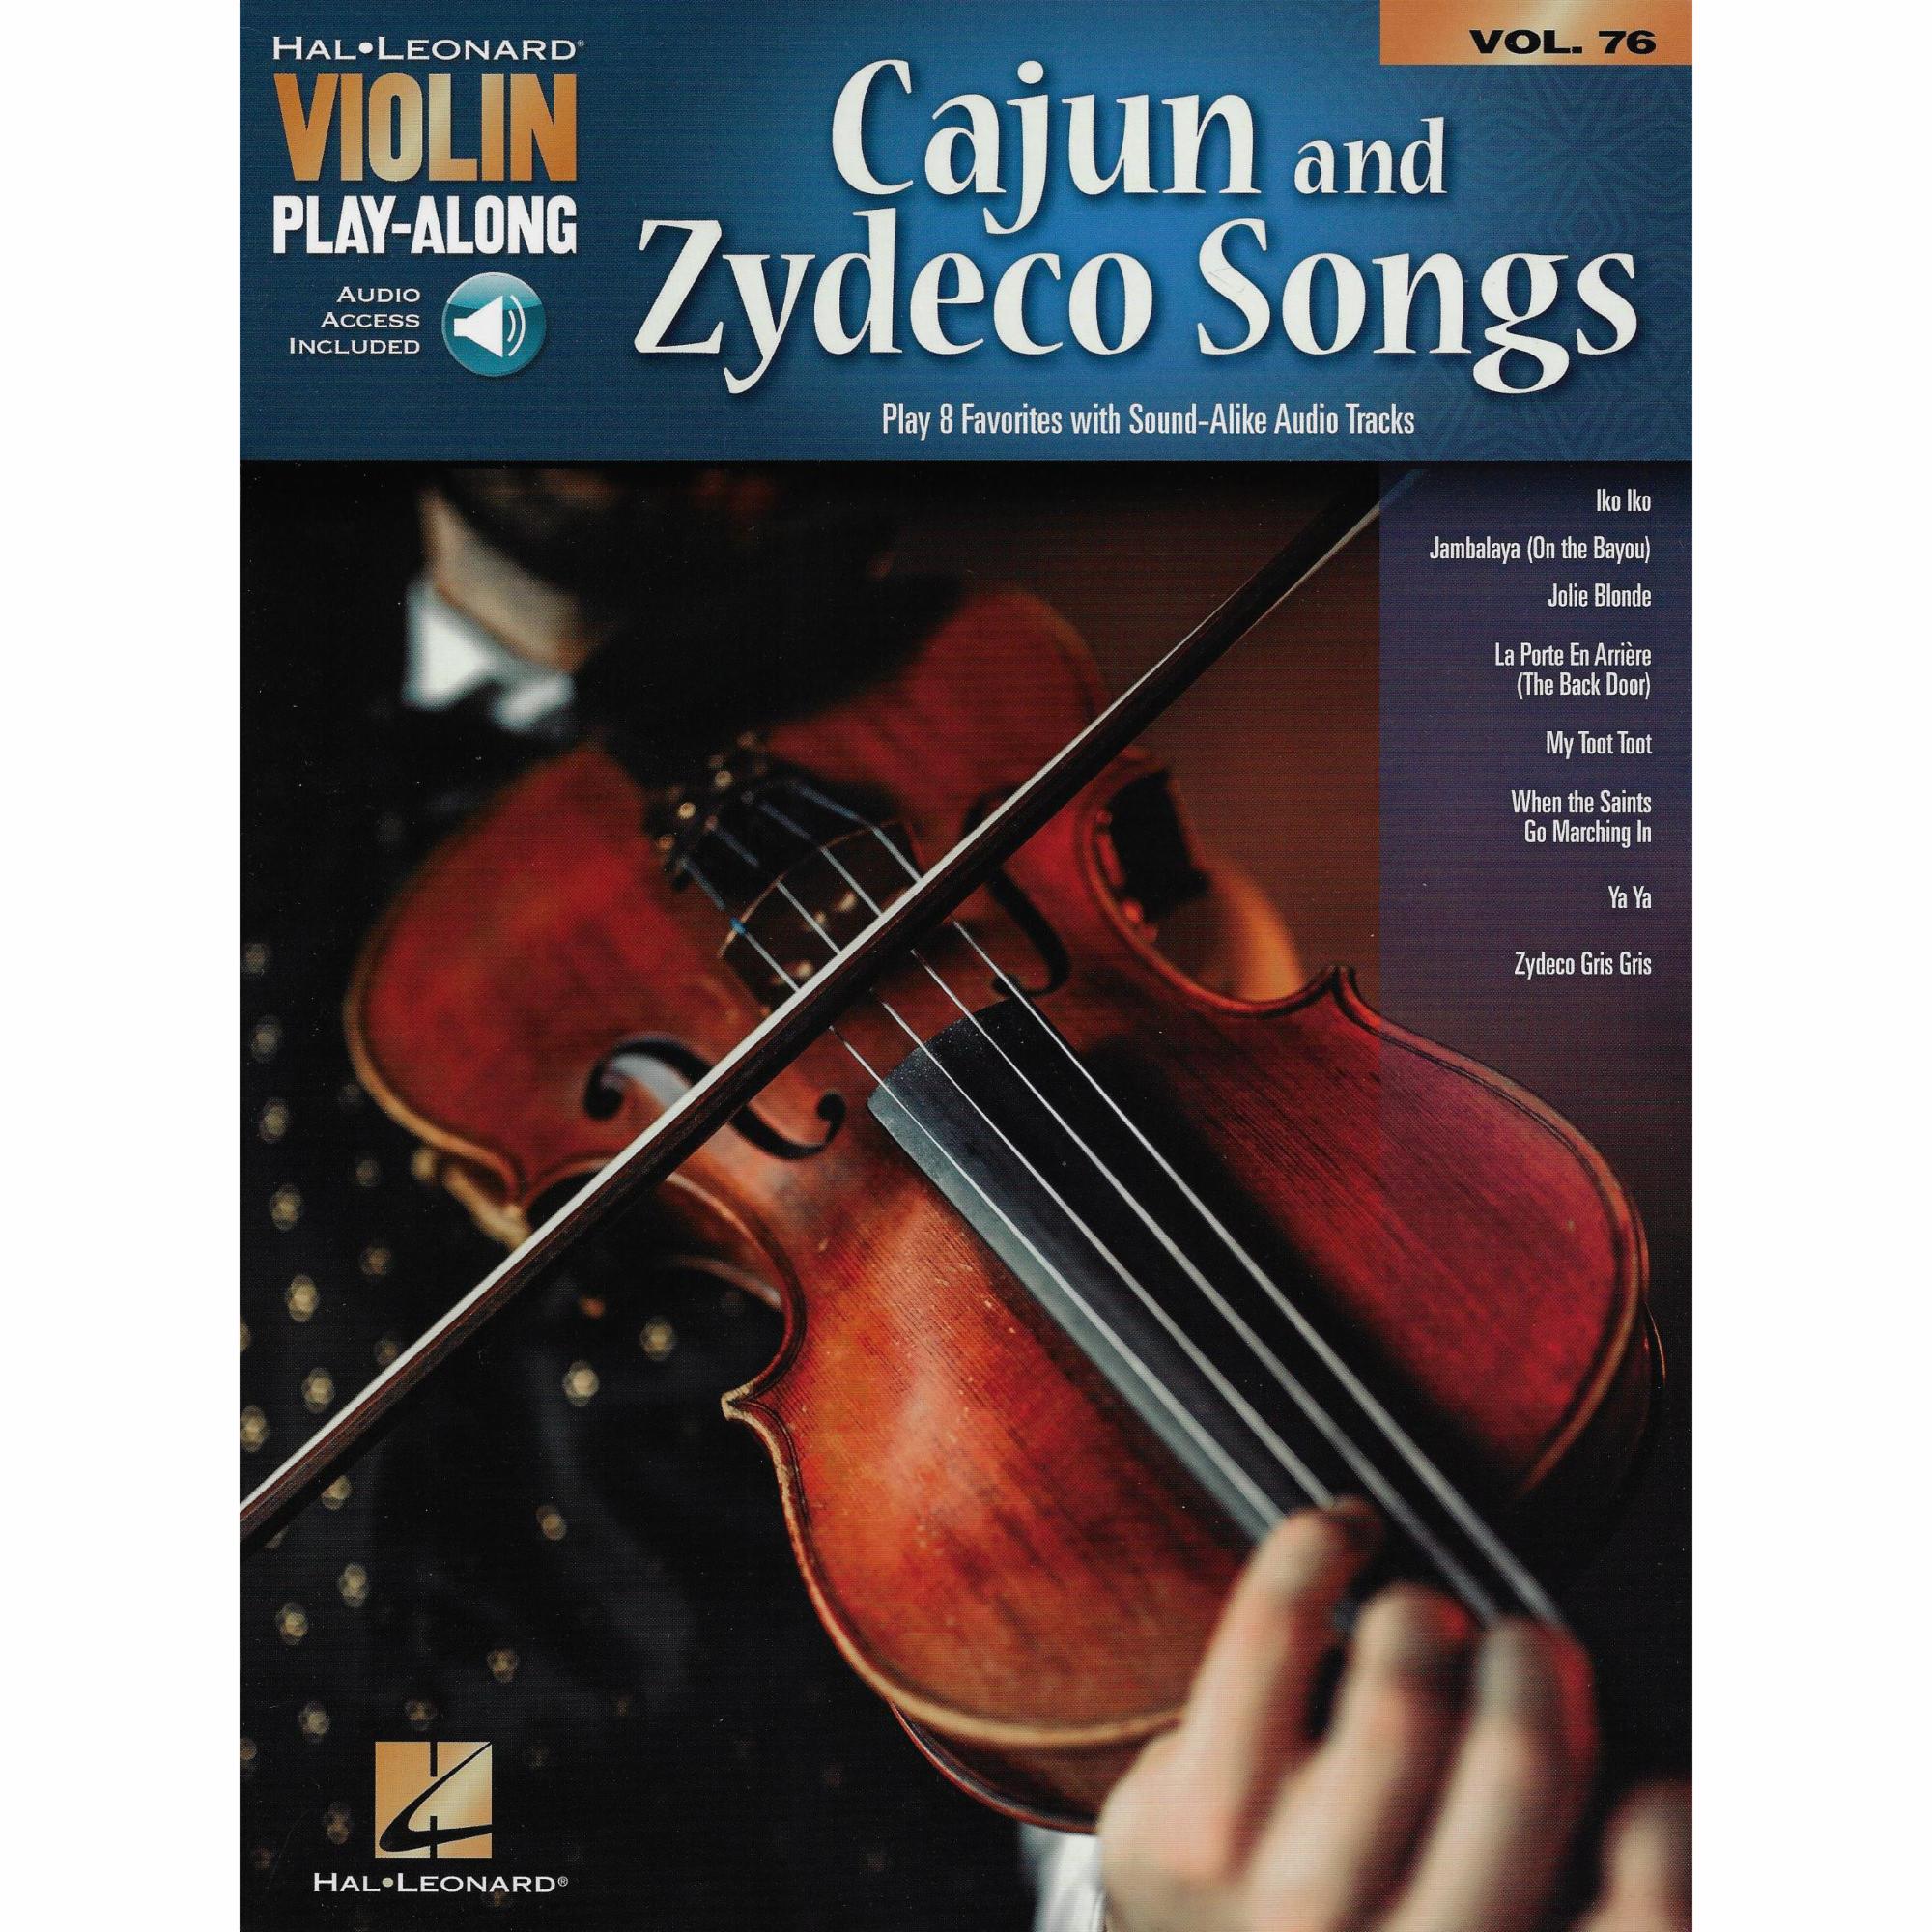 Cajun and Zydeco Songs for Violin